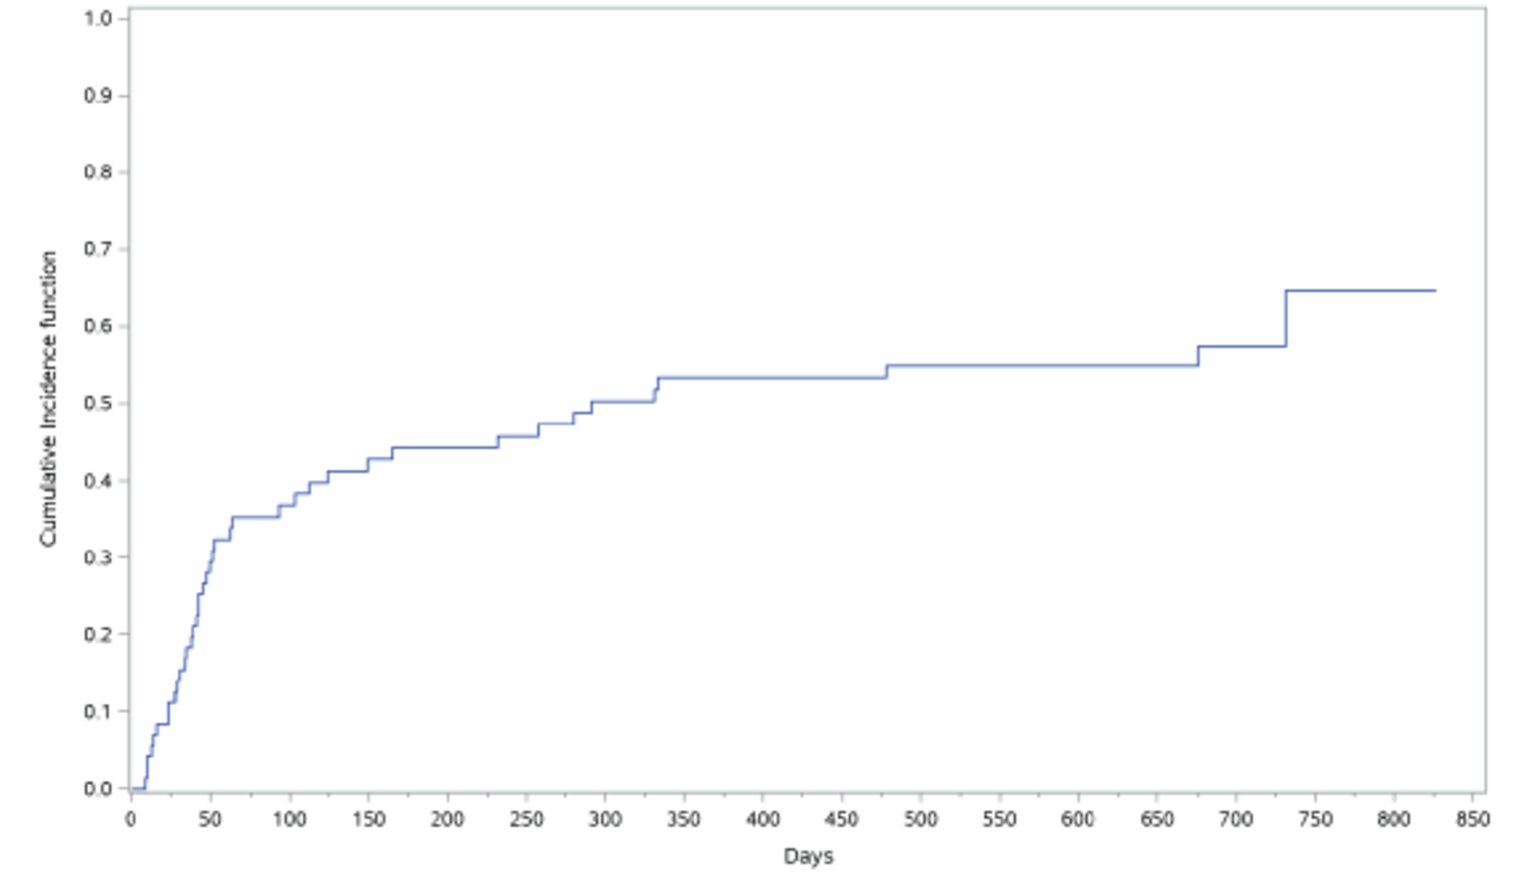 Cumulative Incidence curve of non-relapse mortality in patients who received ruxolitinib. The curve increases over time. The slope is steeper in the beginning than toward the end. The curve ends at about 840 days.